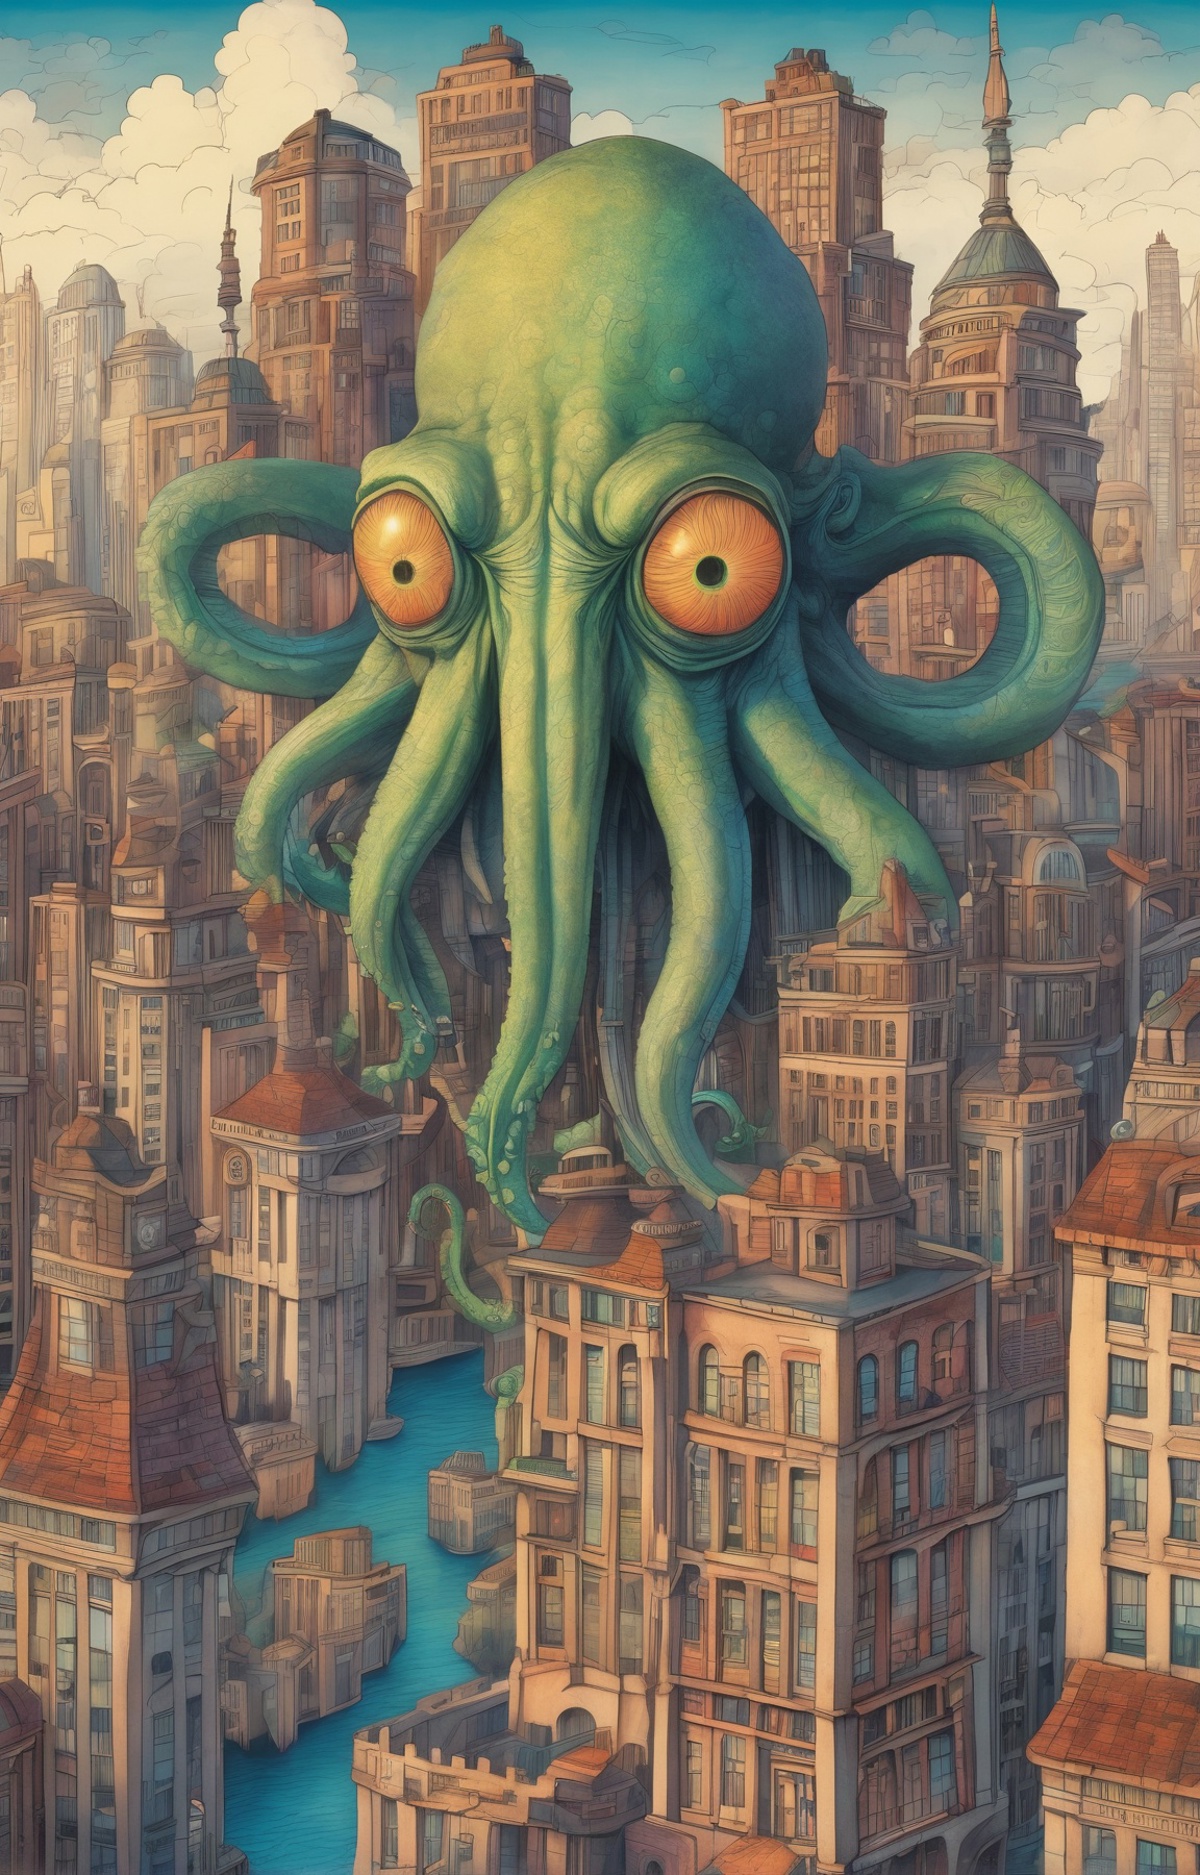 A large, menacing green octopus with glowing red eyes is seen towering over a city landscape, with tall buildings looming in the background. The octopus is positioned in the middle of the scene, taking up a significant portion of the image. Its tentacles are spread out, showcasing its massive size and intimidating presence. The cityscape below it appears to be a mix of urban architecture, with buildings of various heights and styles. The overall atmosphere of the image is one of mysterious and ominous danger.